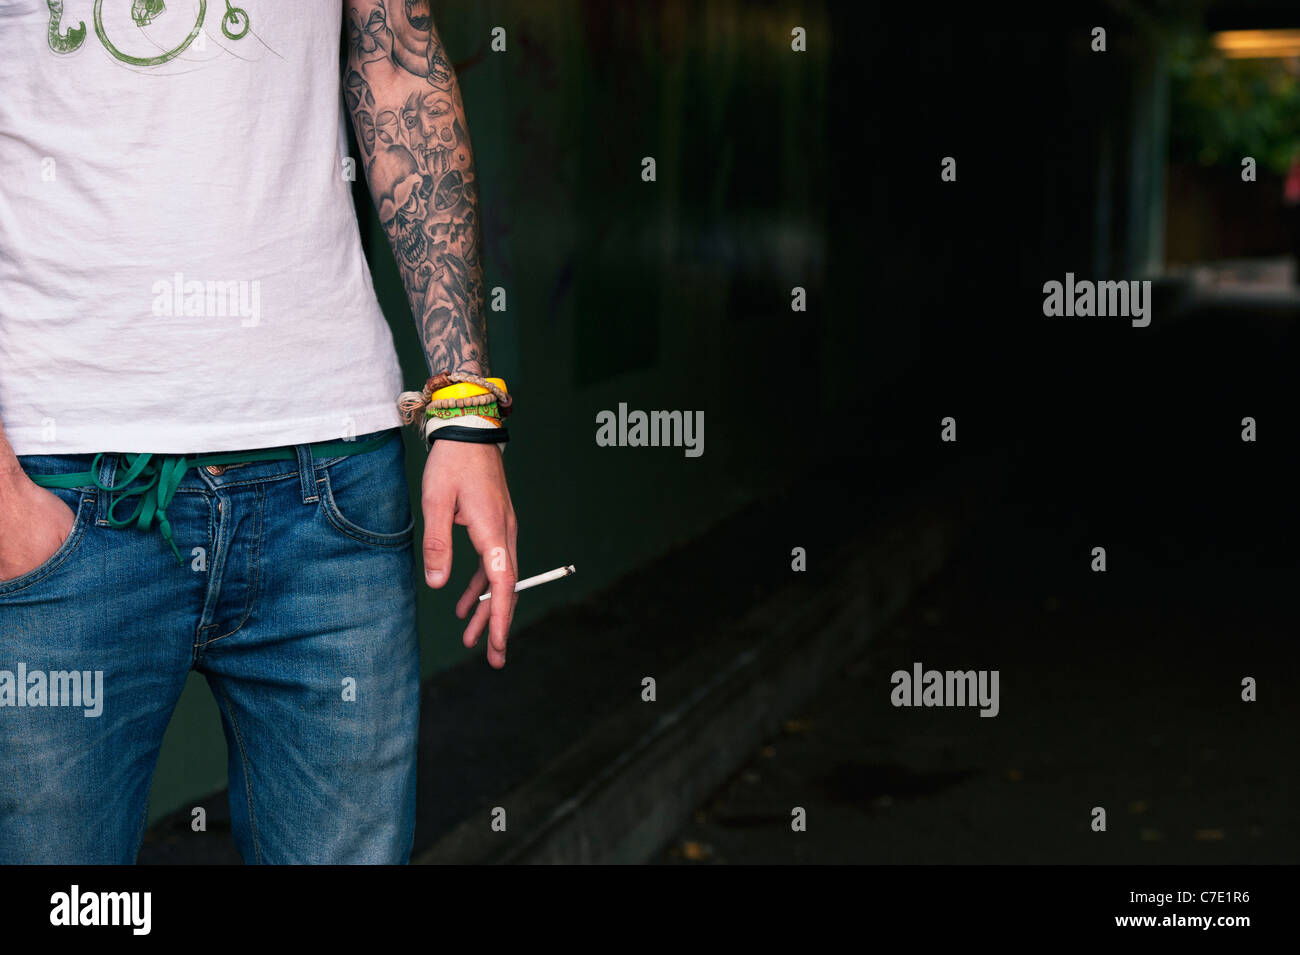 Tattooed Teenager holding a Cannabis Joint Stock Photo